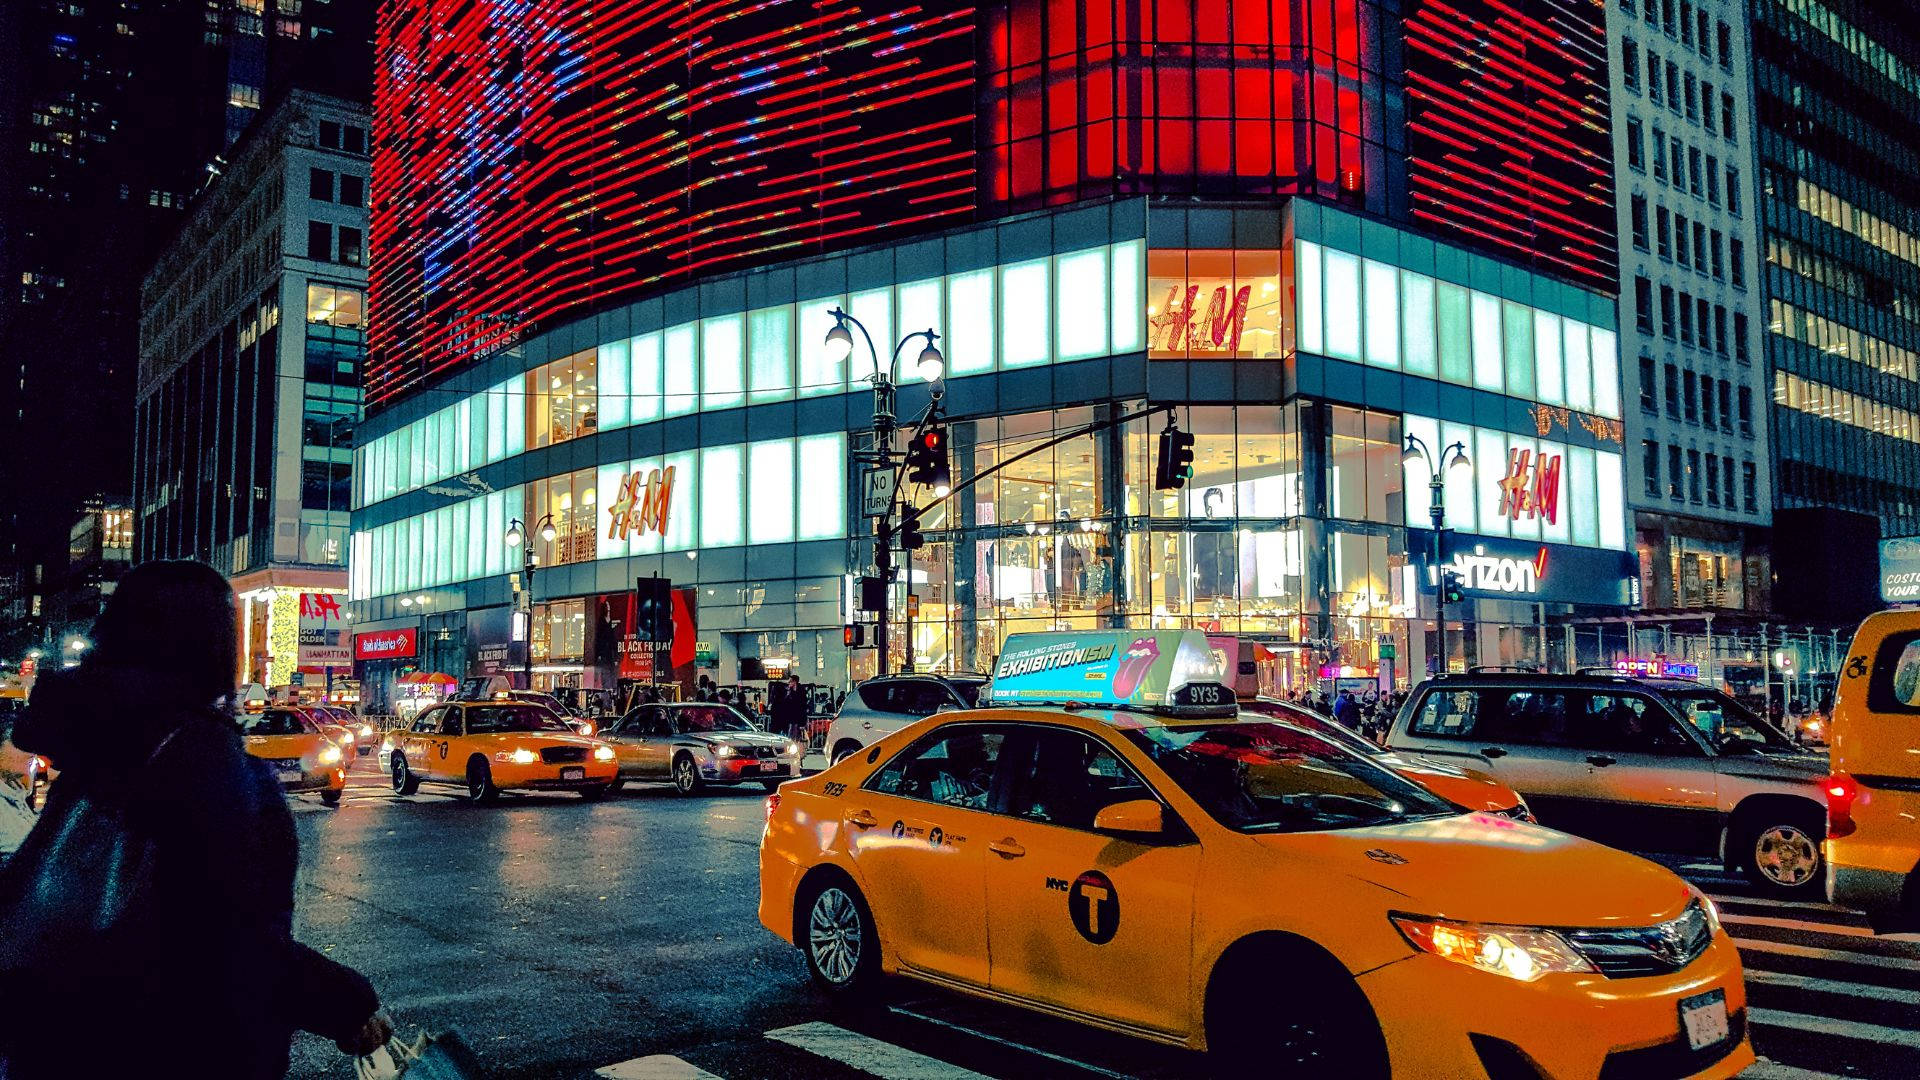 Taxi Against H&m Store At Night Wallpaper